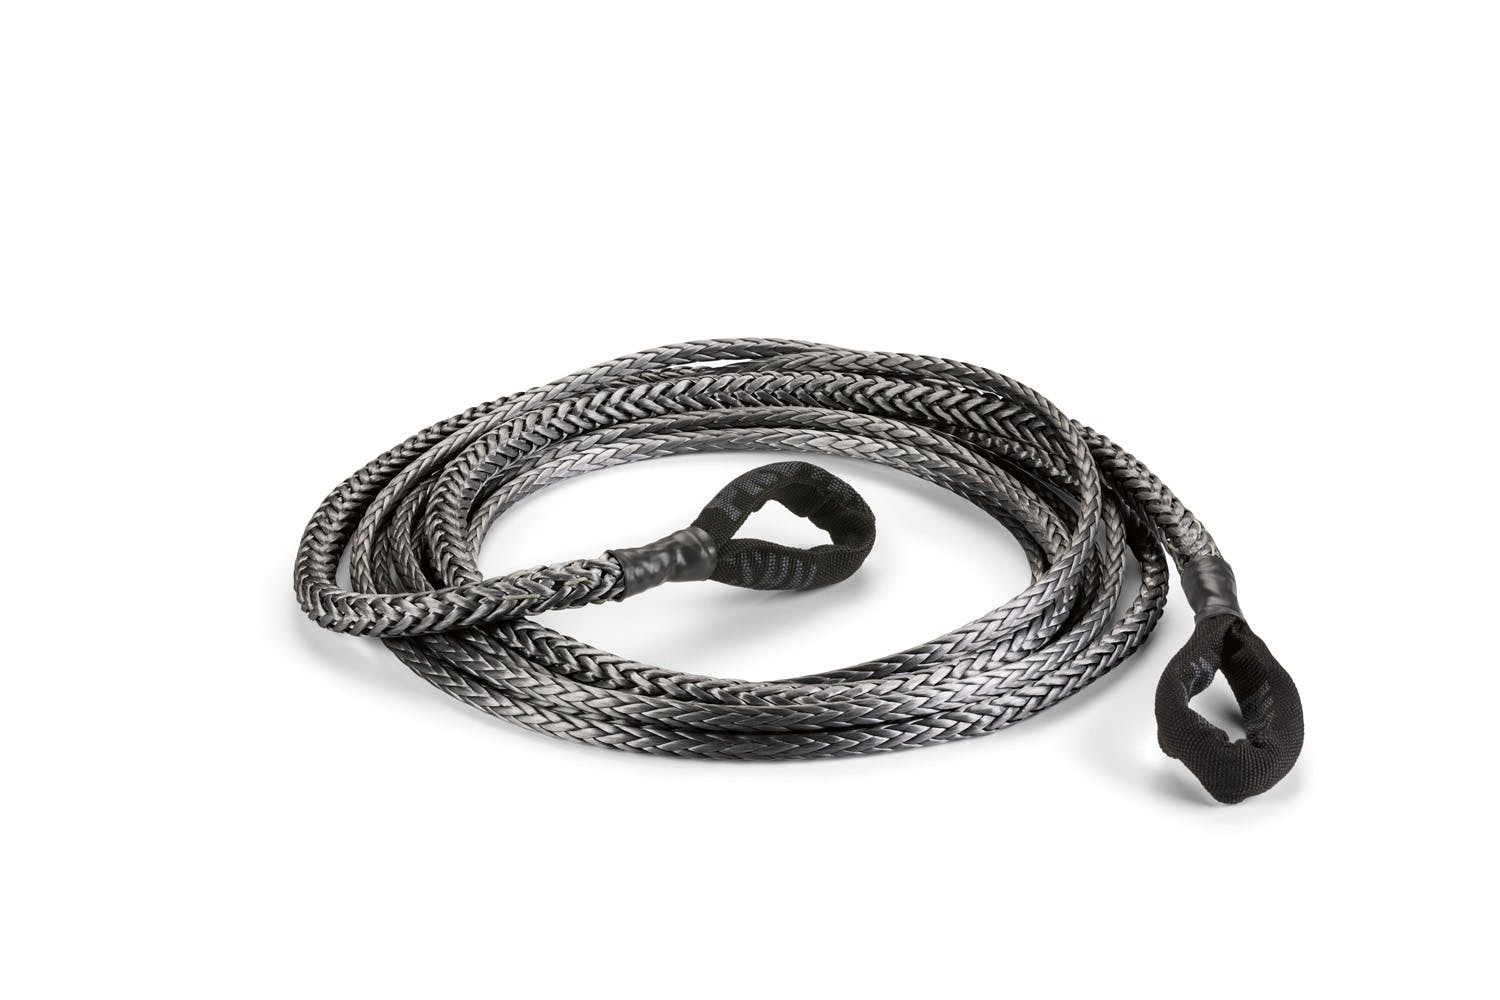 WARN 93121 Standard Duty and Spydura® Synthetic Rope and Extensions